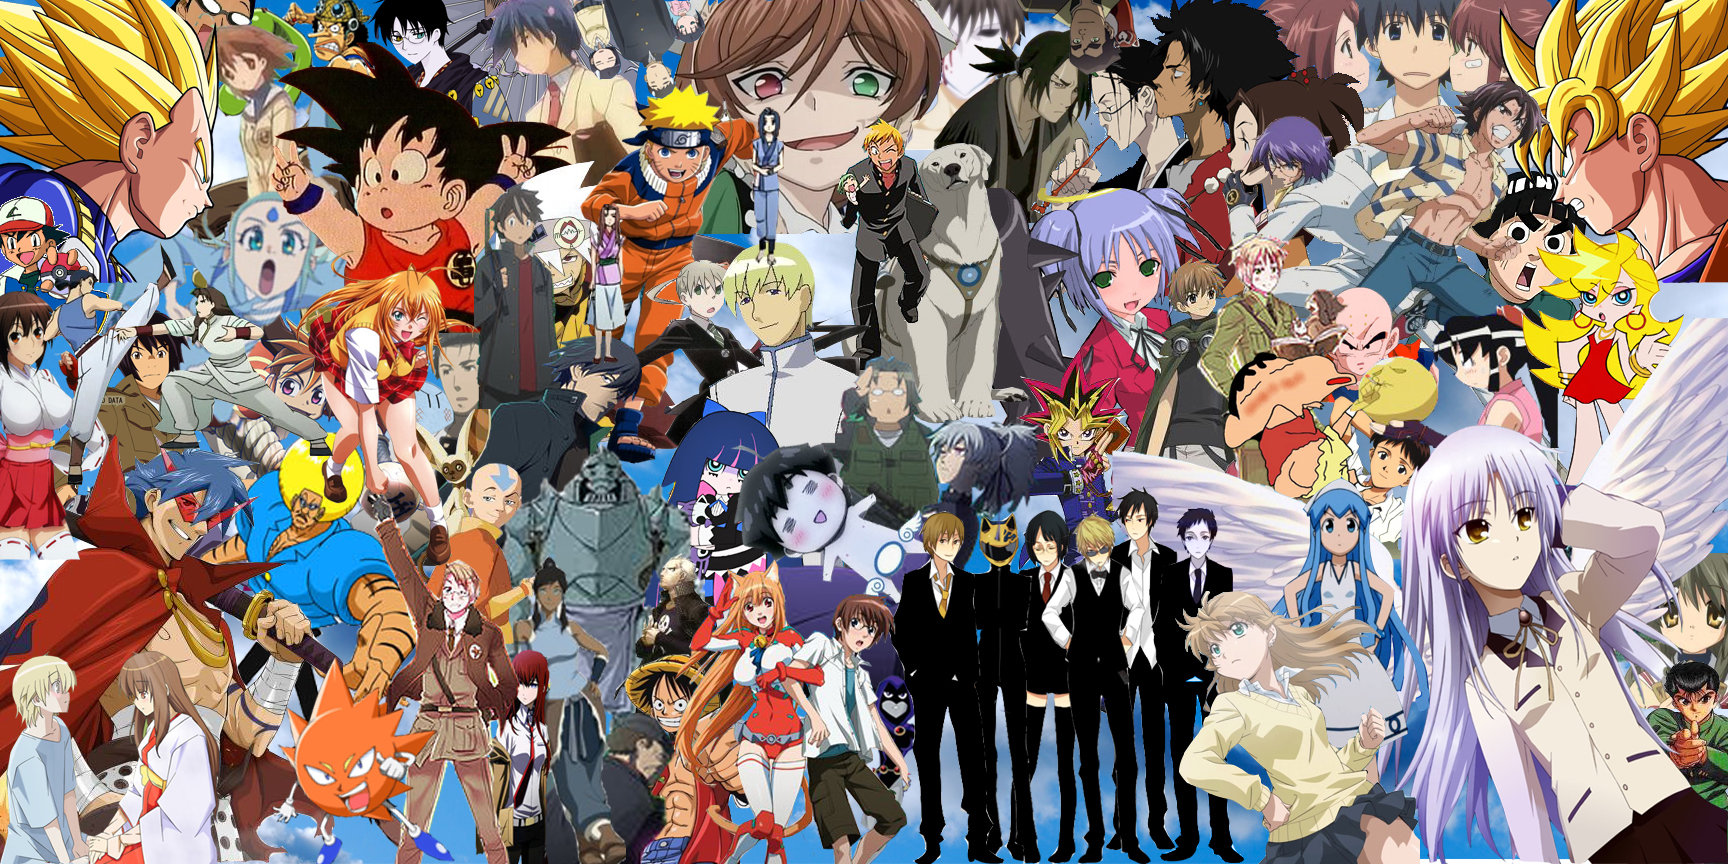 ALL of the anime